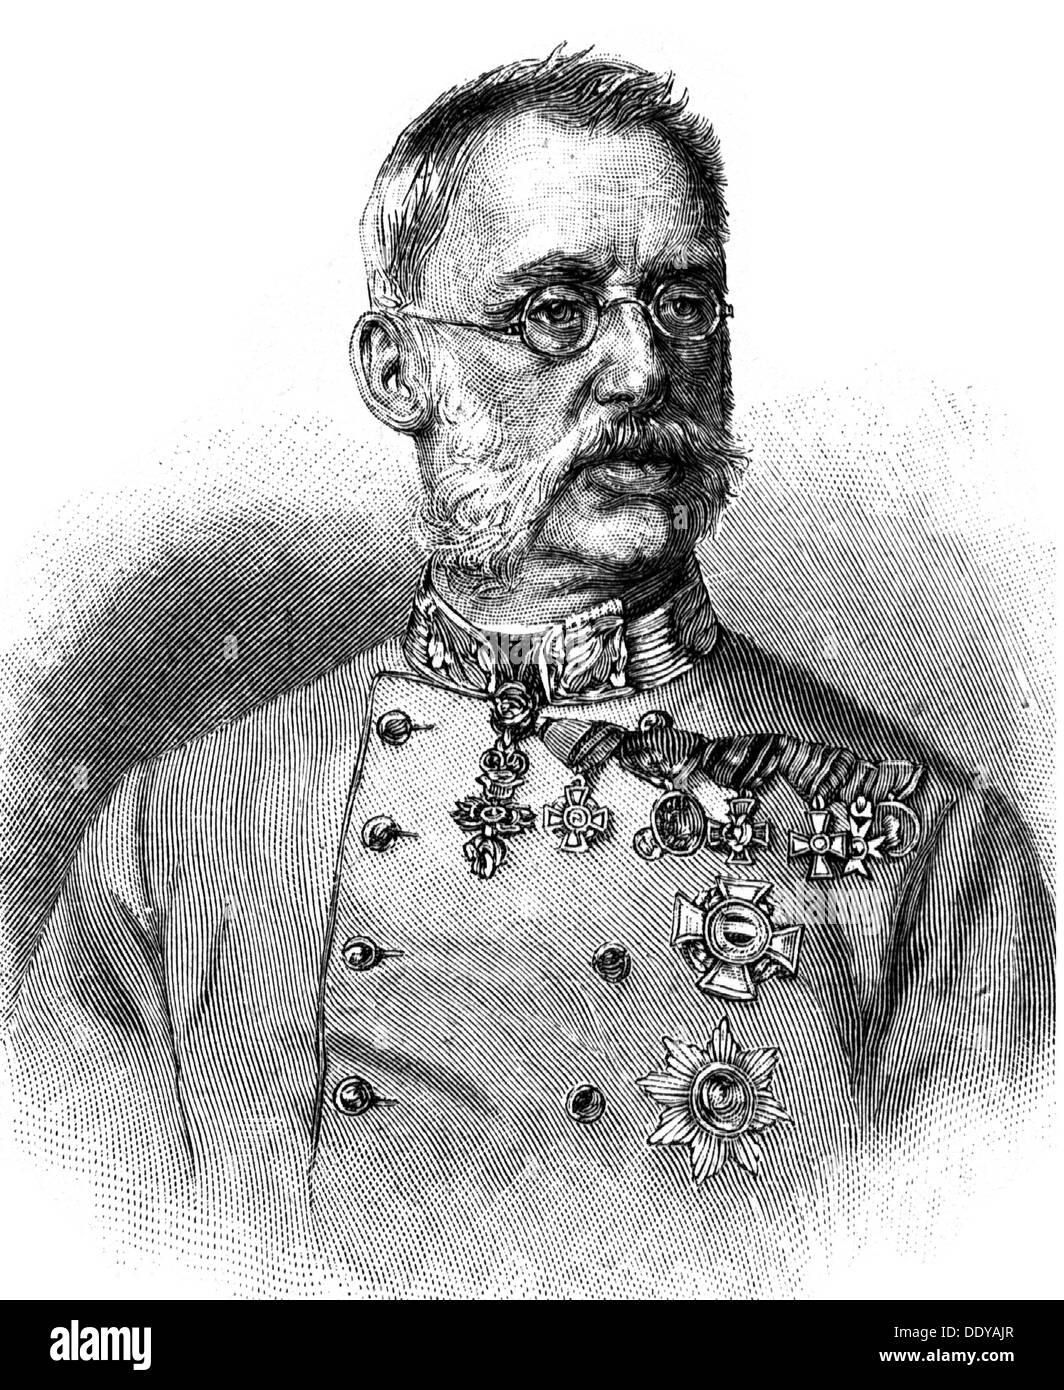 Albrecht, 3.8.1817 - 18.2.1895, Archduke of Austria, Austrian general, inspector general of the Austro-Hungarian Army 1868 - 1895, half length, wood engraving, 2nd half 19th century, , Stock Photo